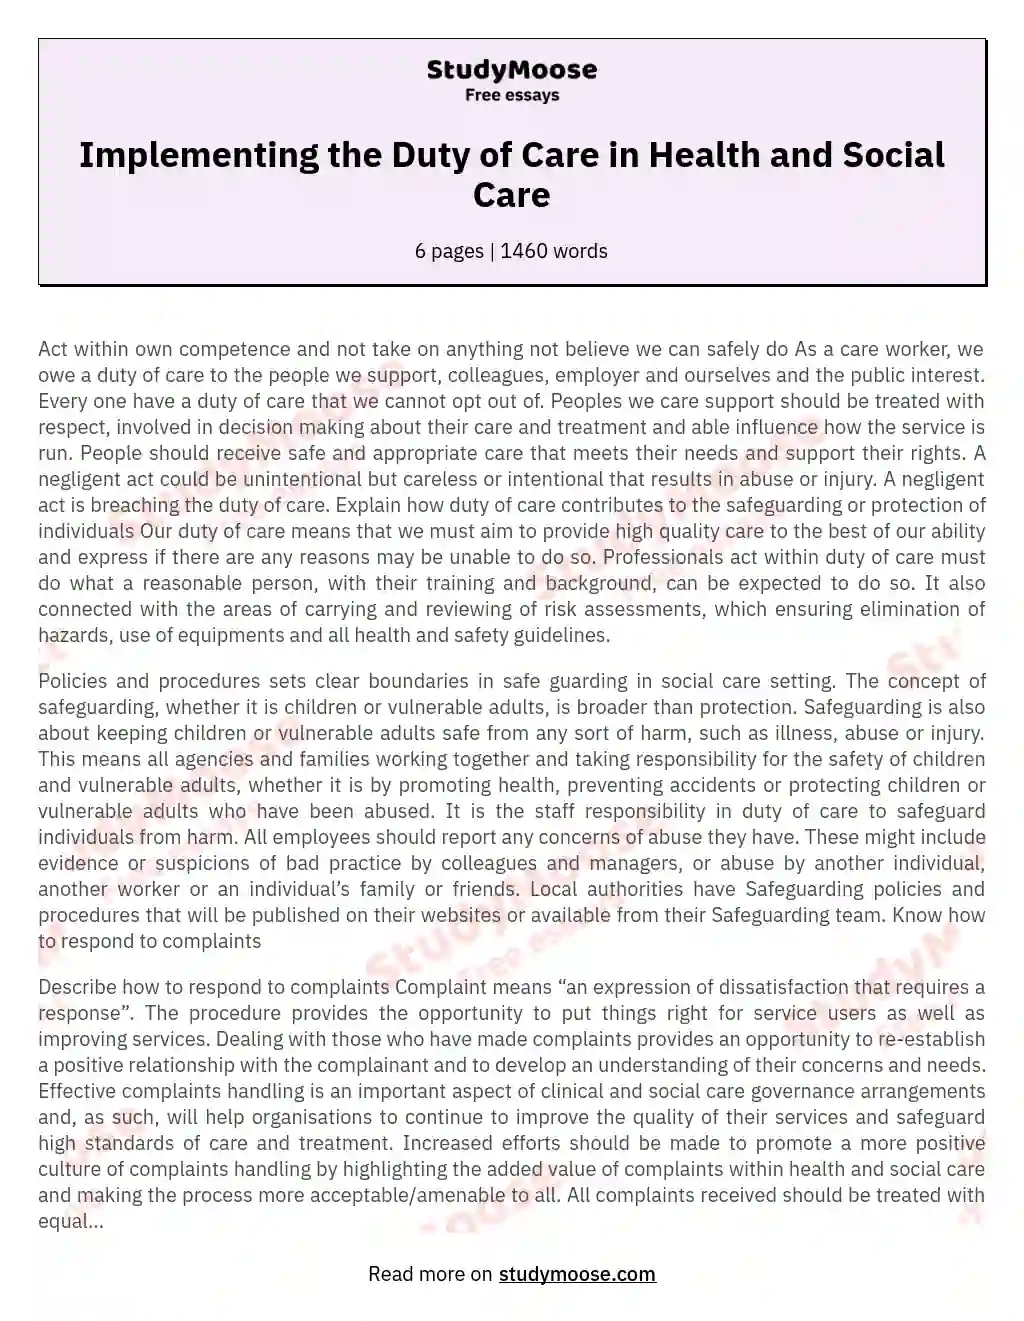 Implementing the Duty of Care in Health and Social Care essay